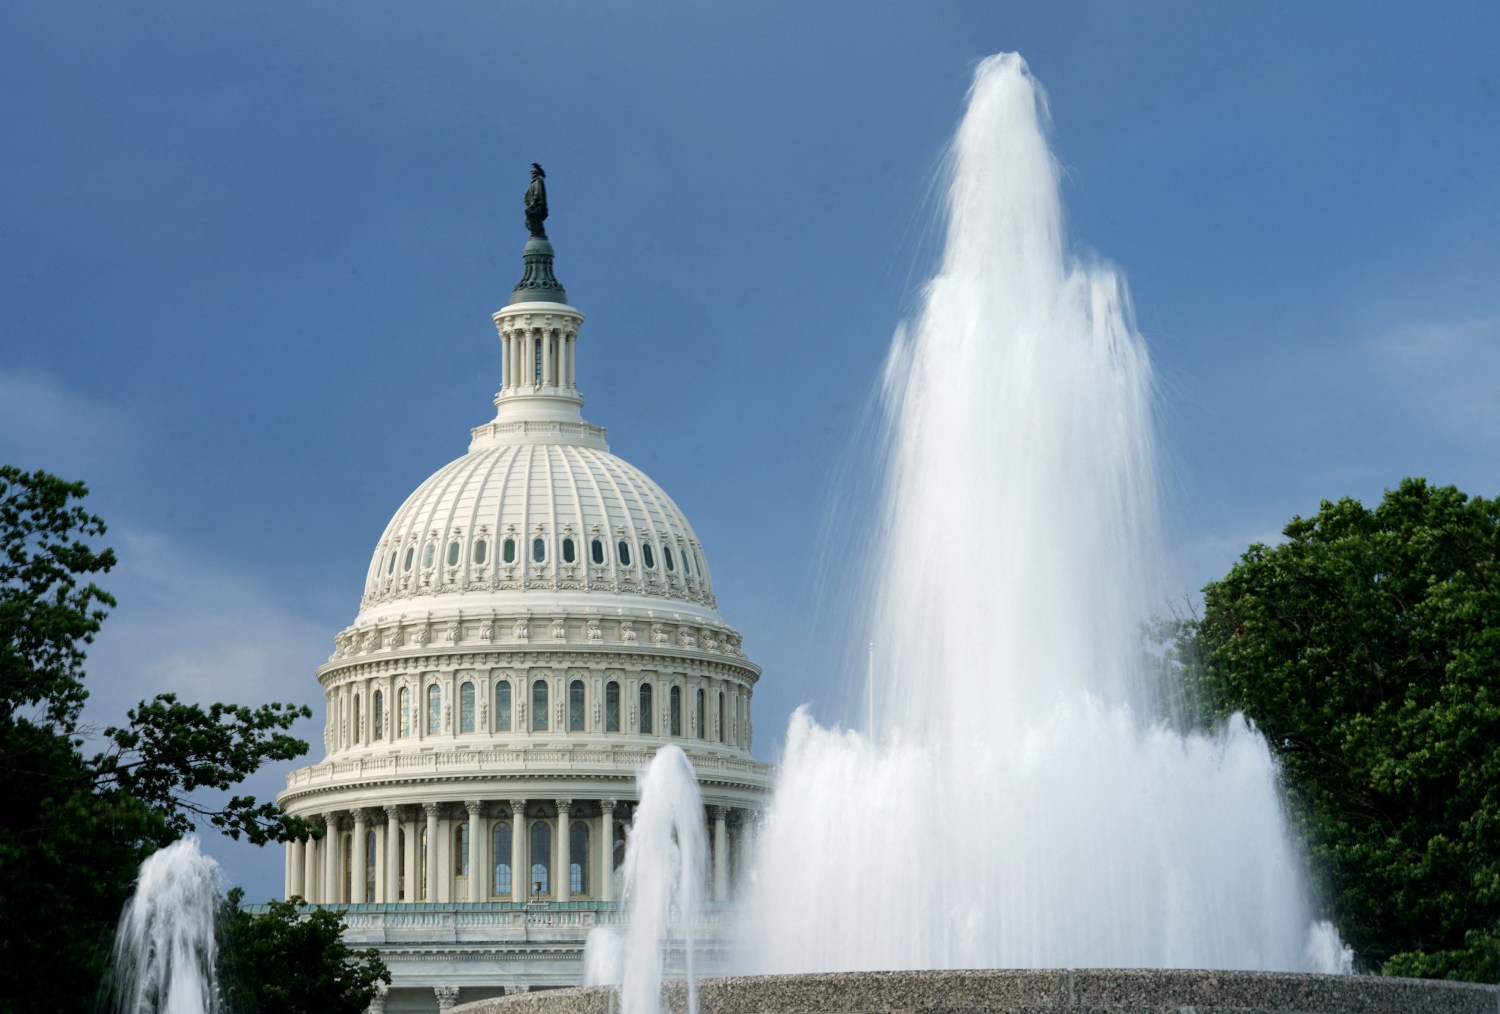 FILE PHOTO: The dome of the U.S. Capitol is seen beyond a fountain on the day the House of Representatives returns from its August recess to vote on the Senate-passed H.R. 6376, the "Inflation Reduction Act of 2022" in Washington, U.S., August 12, 2022. REUTERS/Kevin Lamarque/File Photo